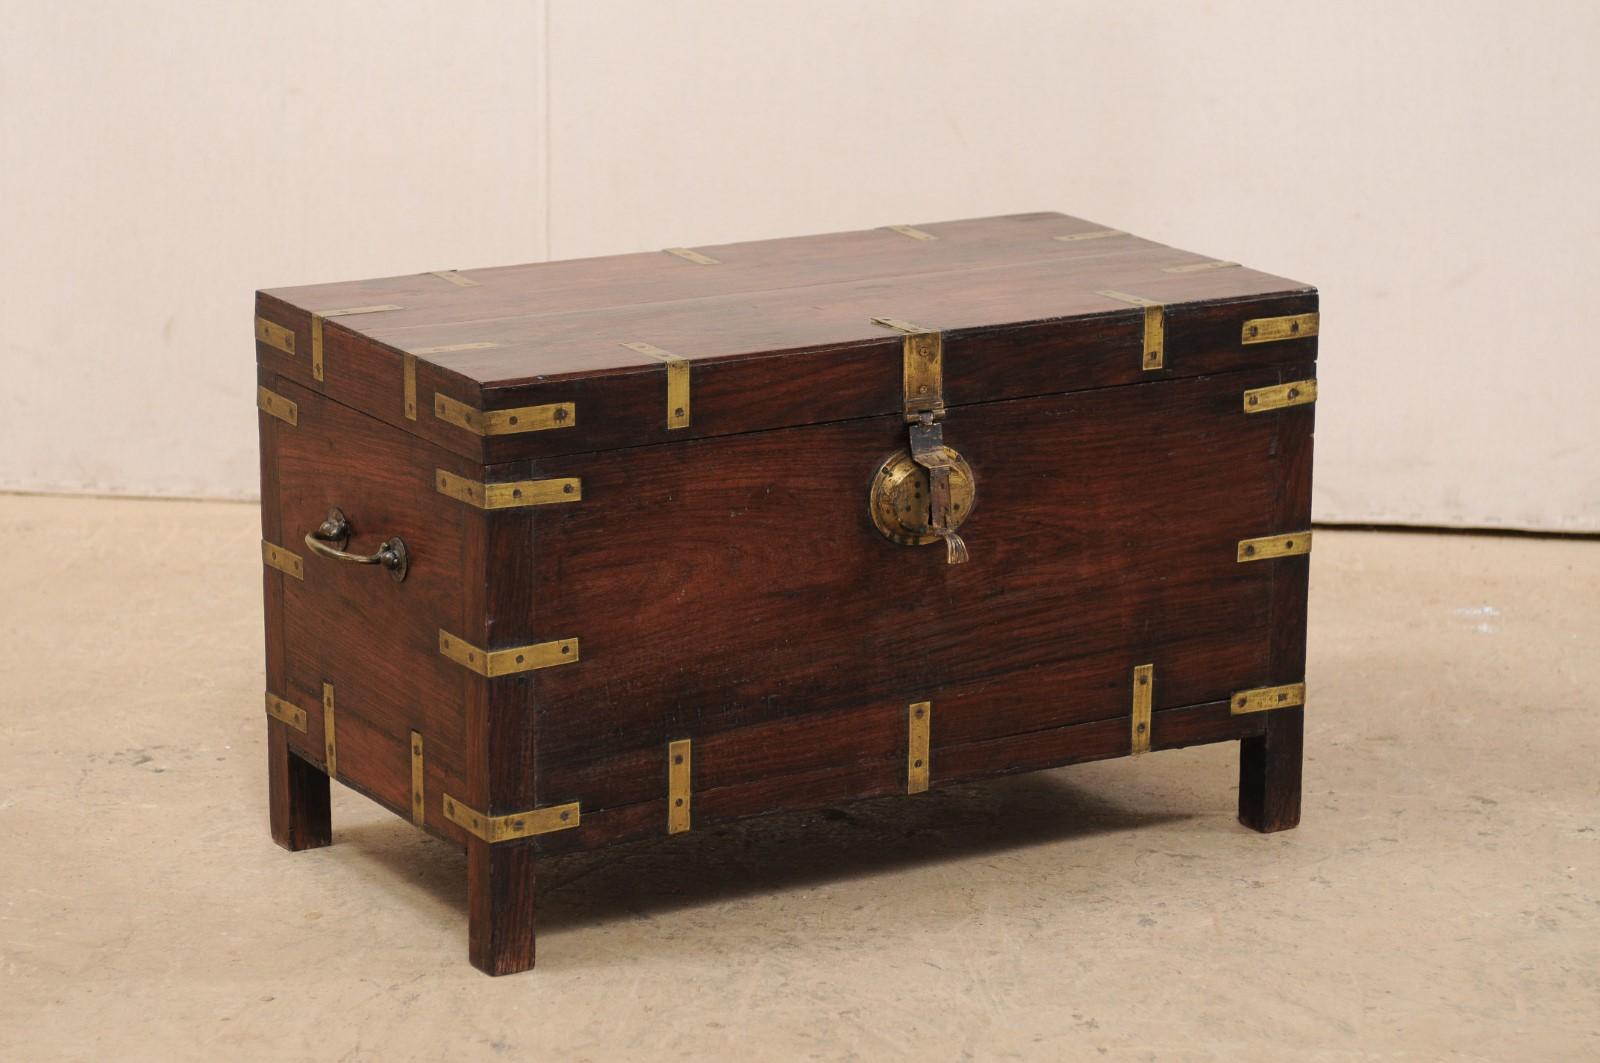 A British Colonial rosewood trunk from the 1920s, which would also function beautifully as a small coffee table. This antique British Colonial keep-sake trunk of beautiful rosewood, has been nicely adorn with brass L-bracket wraps about all of it's